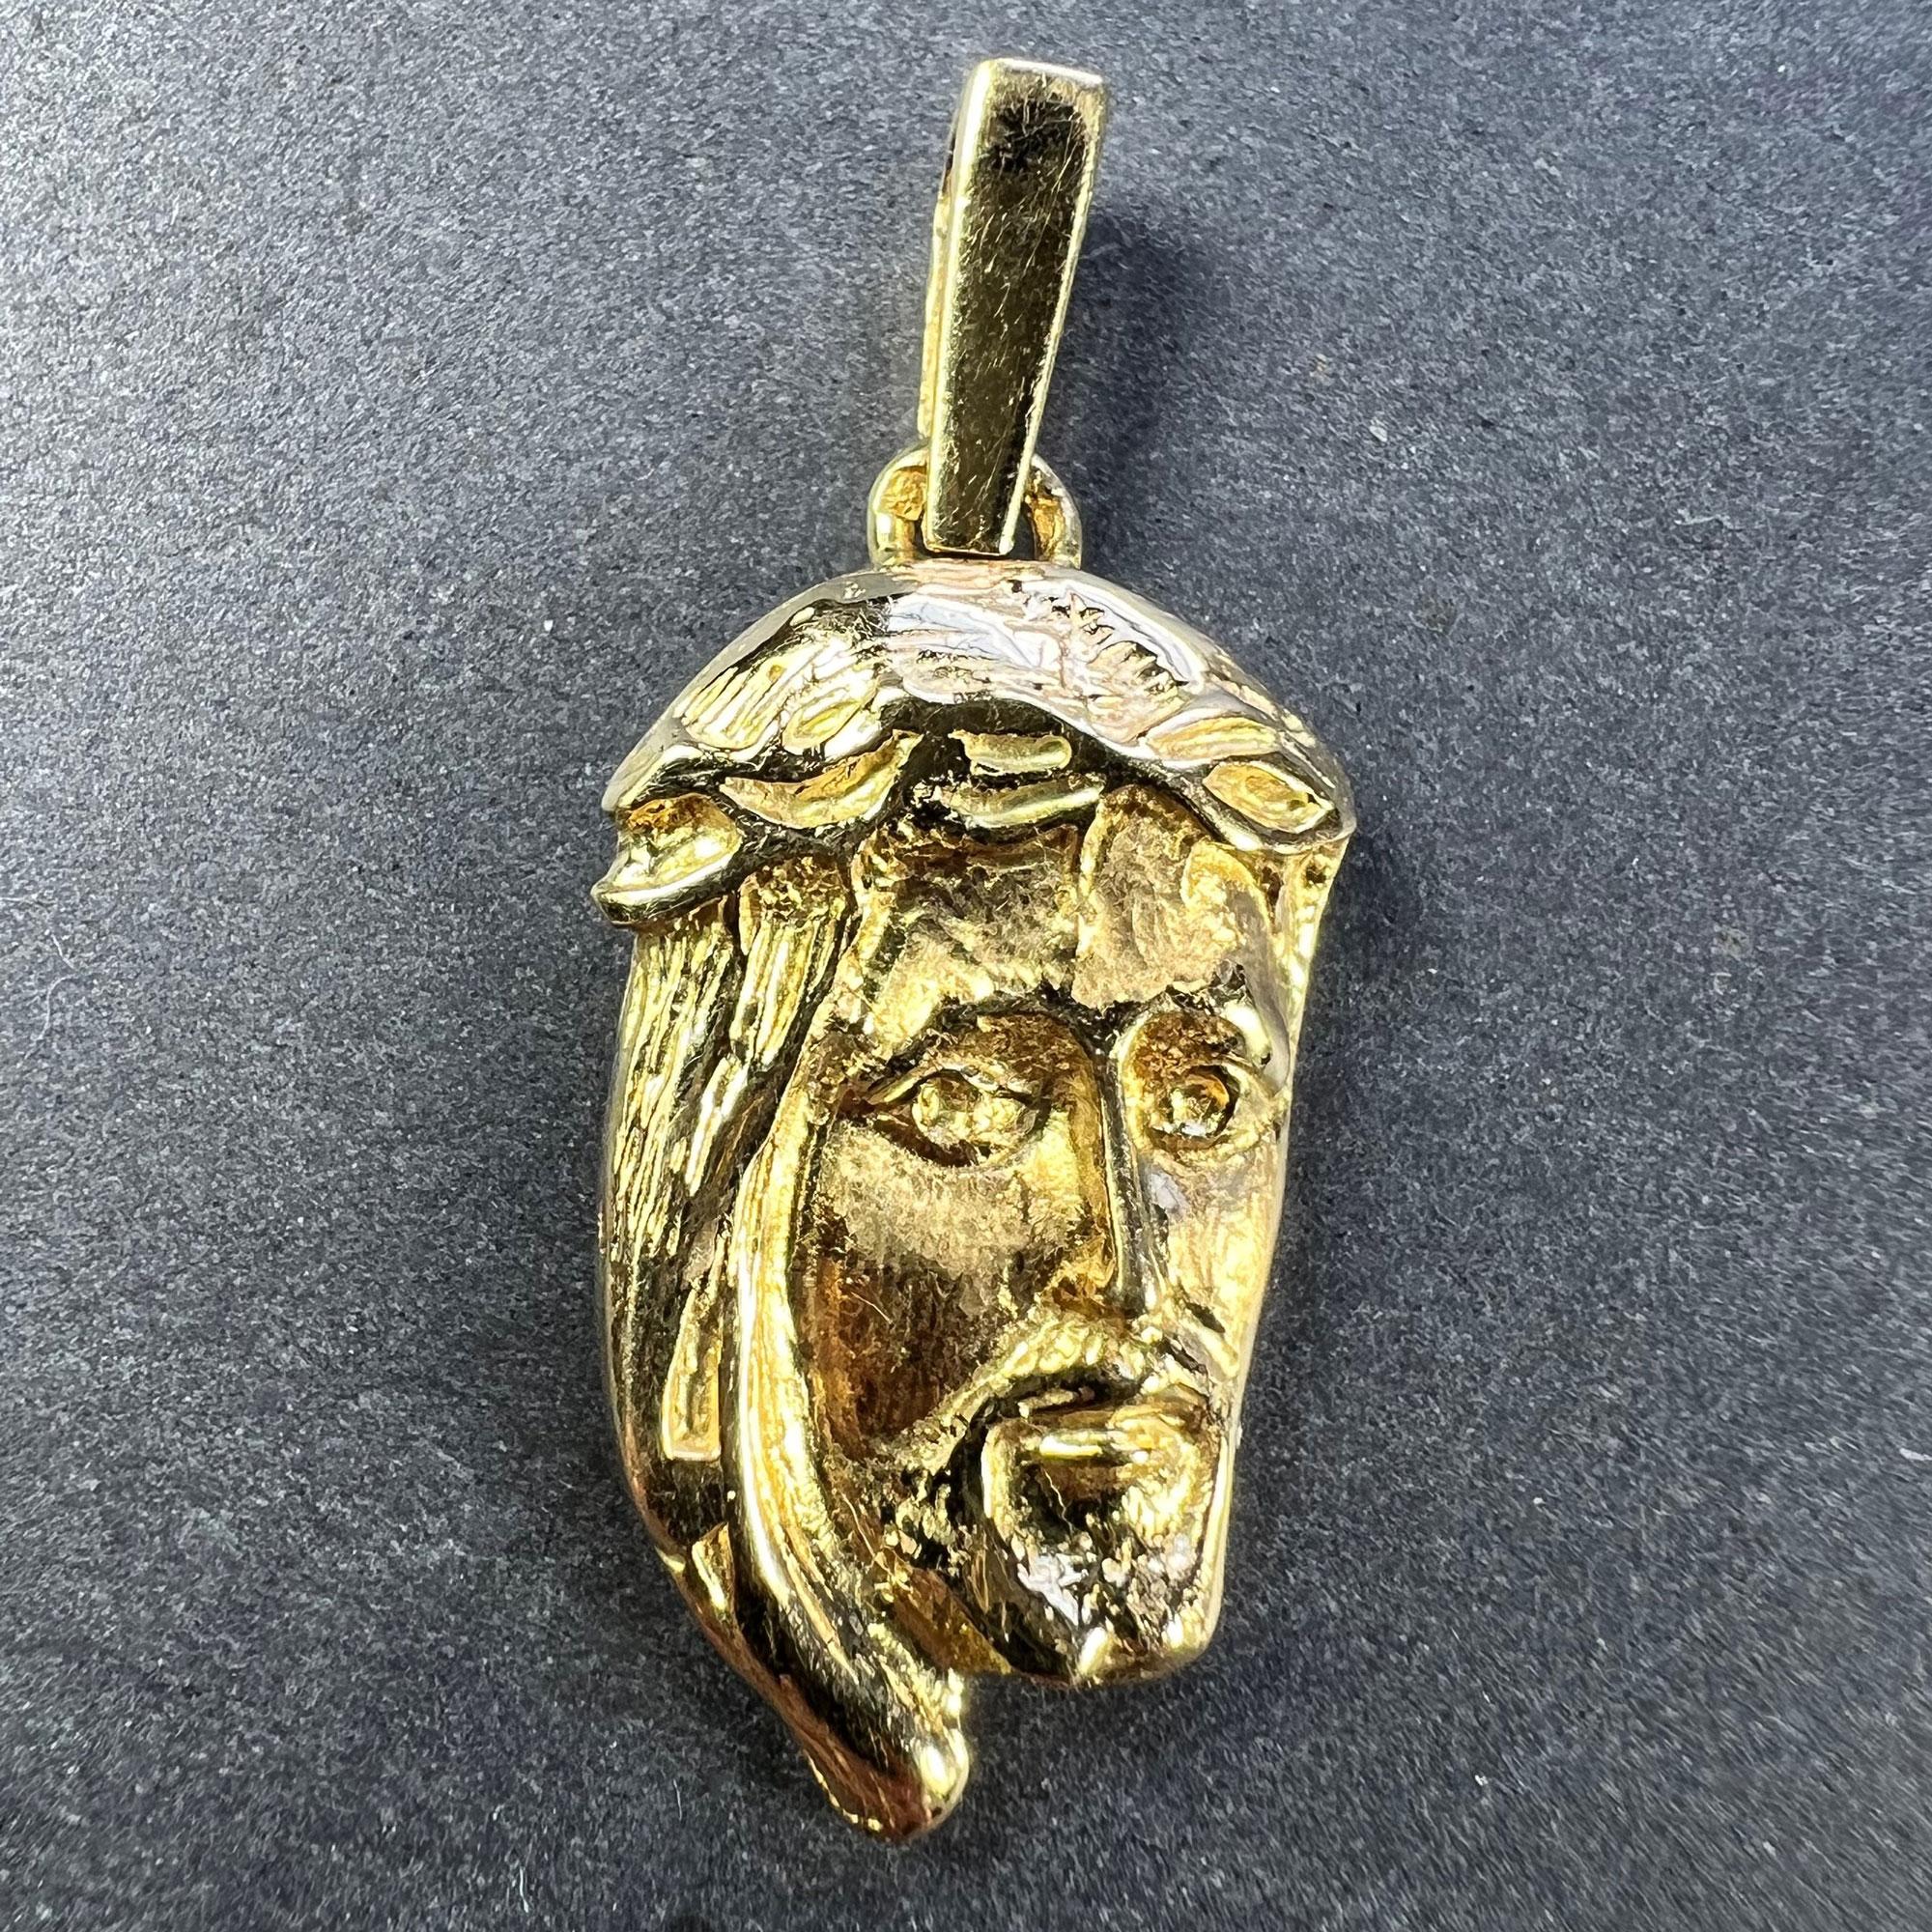 A French 18 karat (18K) yellow gold charm pendant designed as a sculptural three-quarter profile of Jesus Christ wearing the Crown of Thorns. Tested for 18 karat gold and stamped with an unknown maker's mark.

Dimensions: 2.6 x 1.5 x 0.34 cm (not